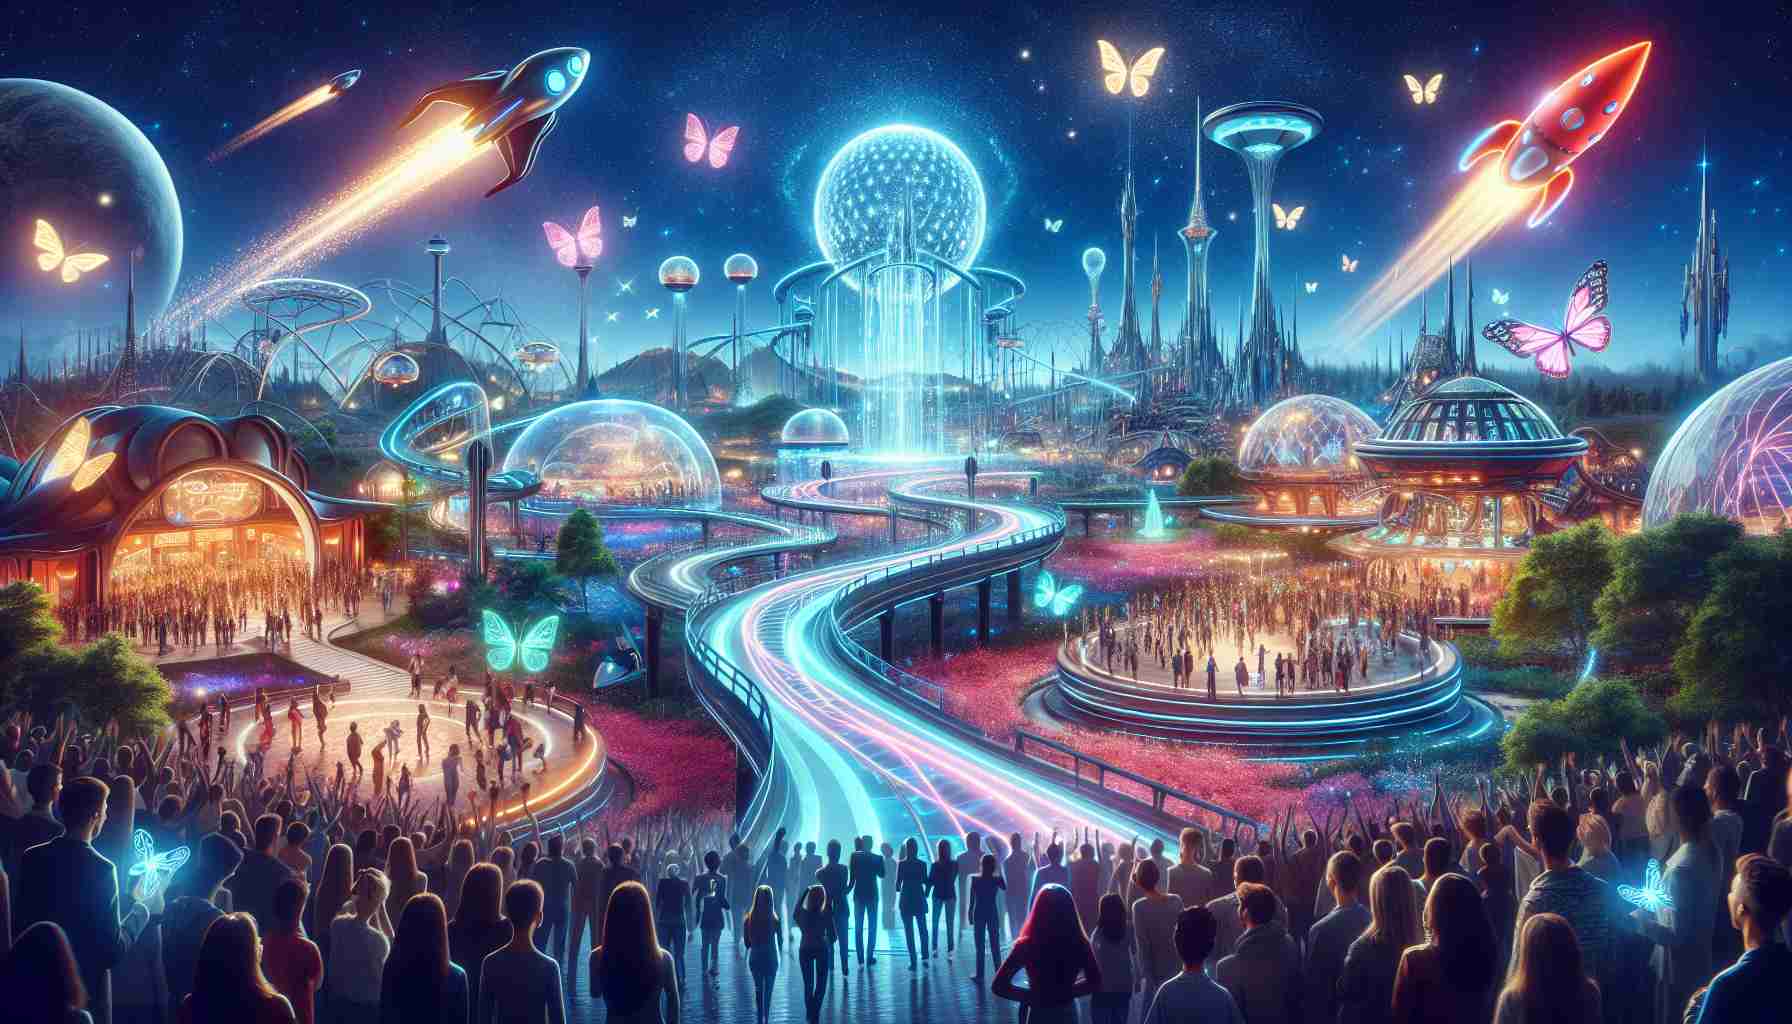 Create a hyper-realistic image of a magical transformation scene, where modern technology blends with an imaginative world of enchantment. Show a theme park filled with the newest advancements and stunning innovation. Key elements could include futuristic rides crafted with luminescent materials, imaginatively designed parks with floating holographic signs or trails, and a crowd of joyful people from all descents and genders marveling at the extraordinary tech-filled magic. Note, this isn't referencing to a specific theme park but representing the blend of technology and imagination at a grand scale.